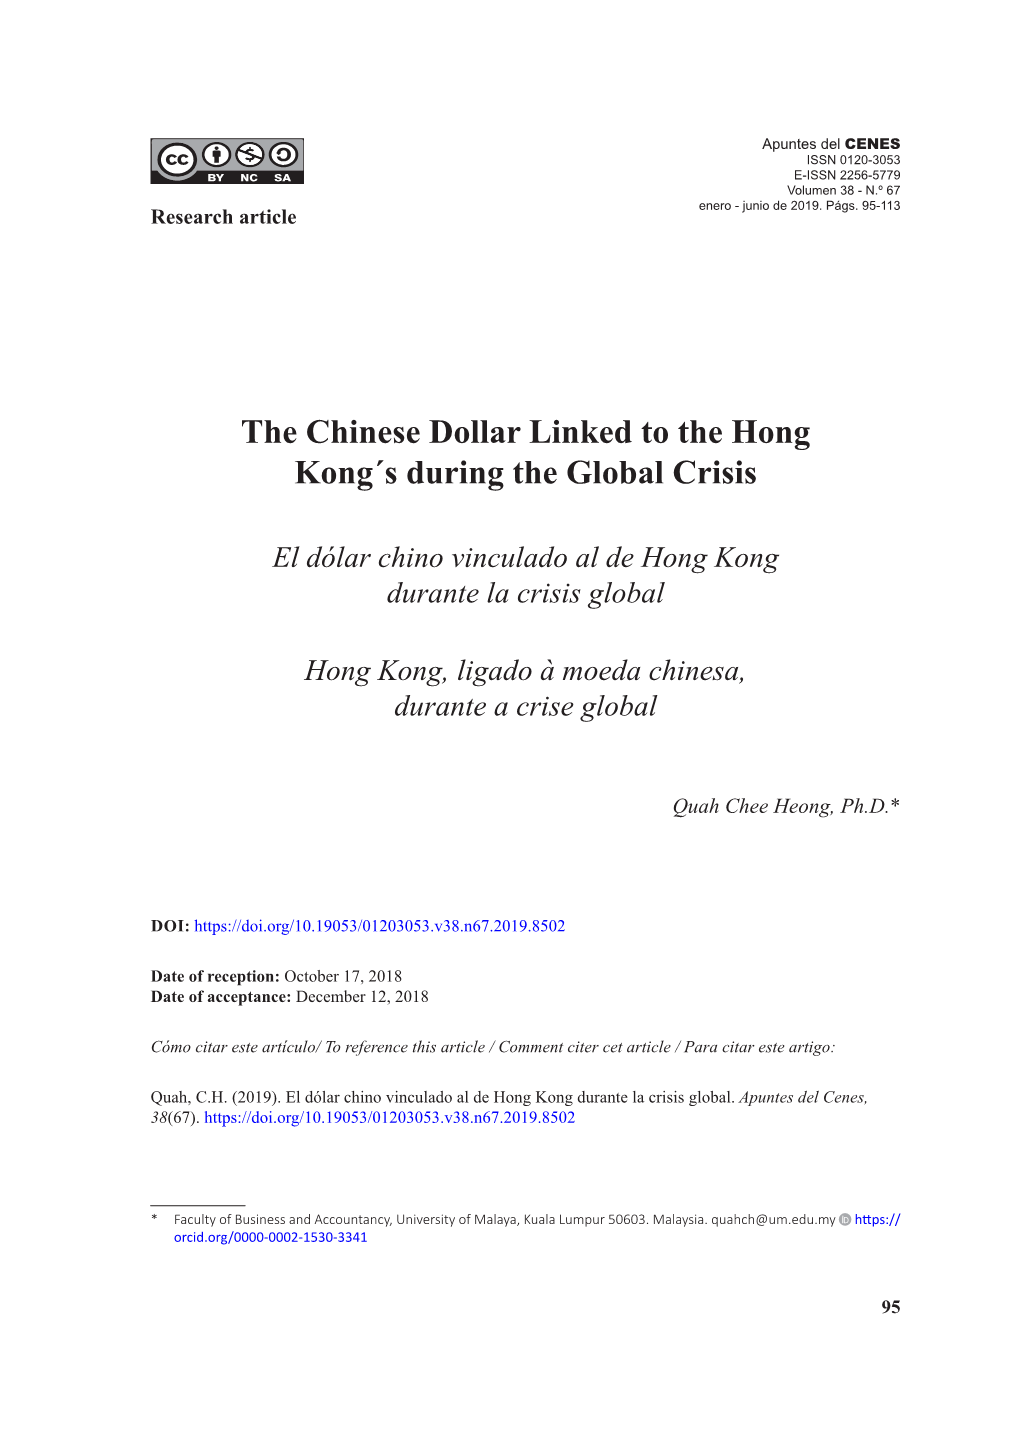 The Chinese Dollar Linked to the Hong Kong´S During the Global Crisis